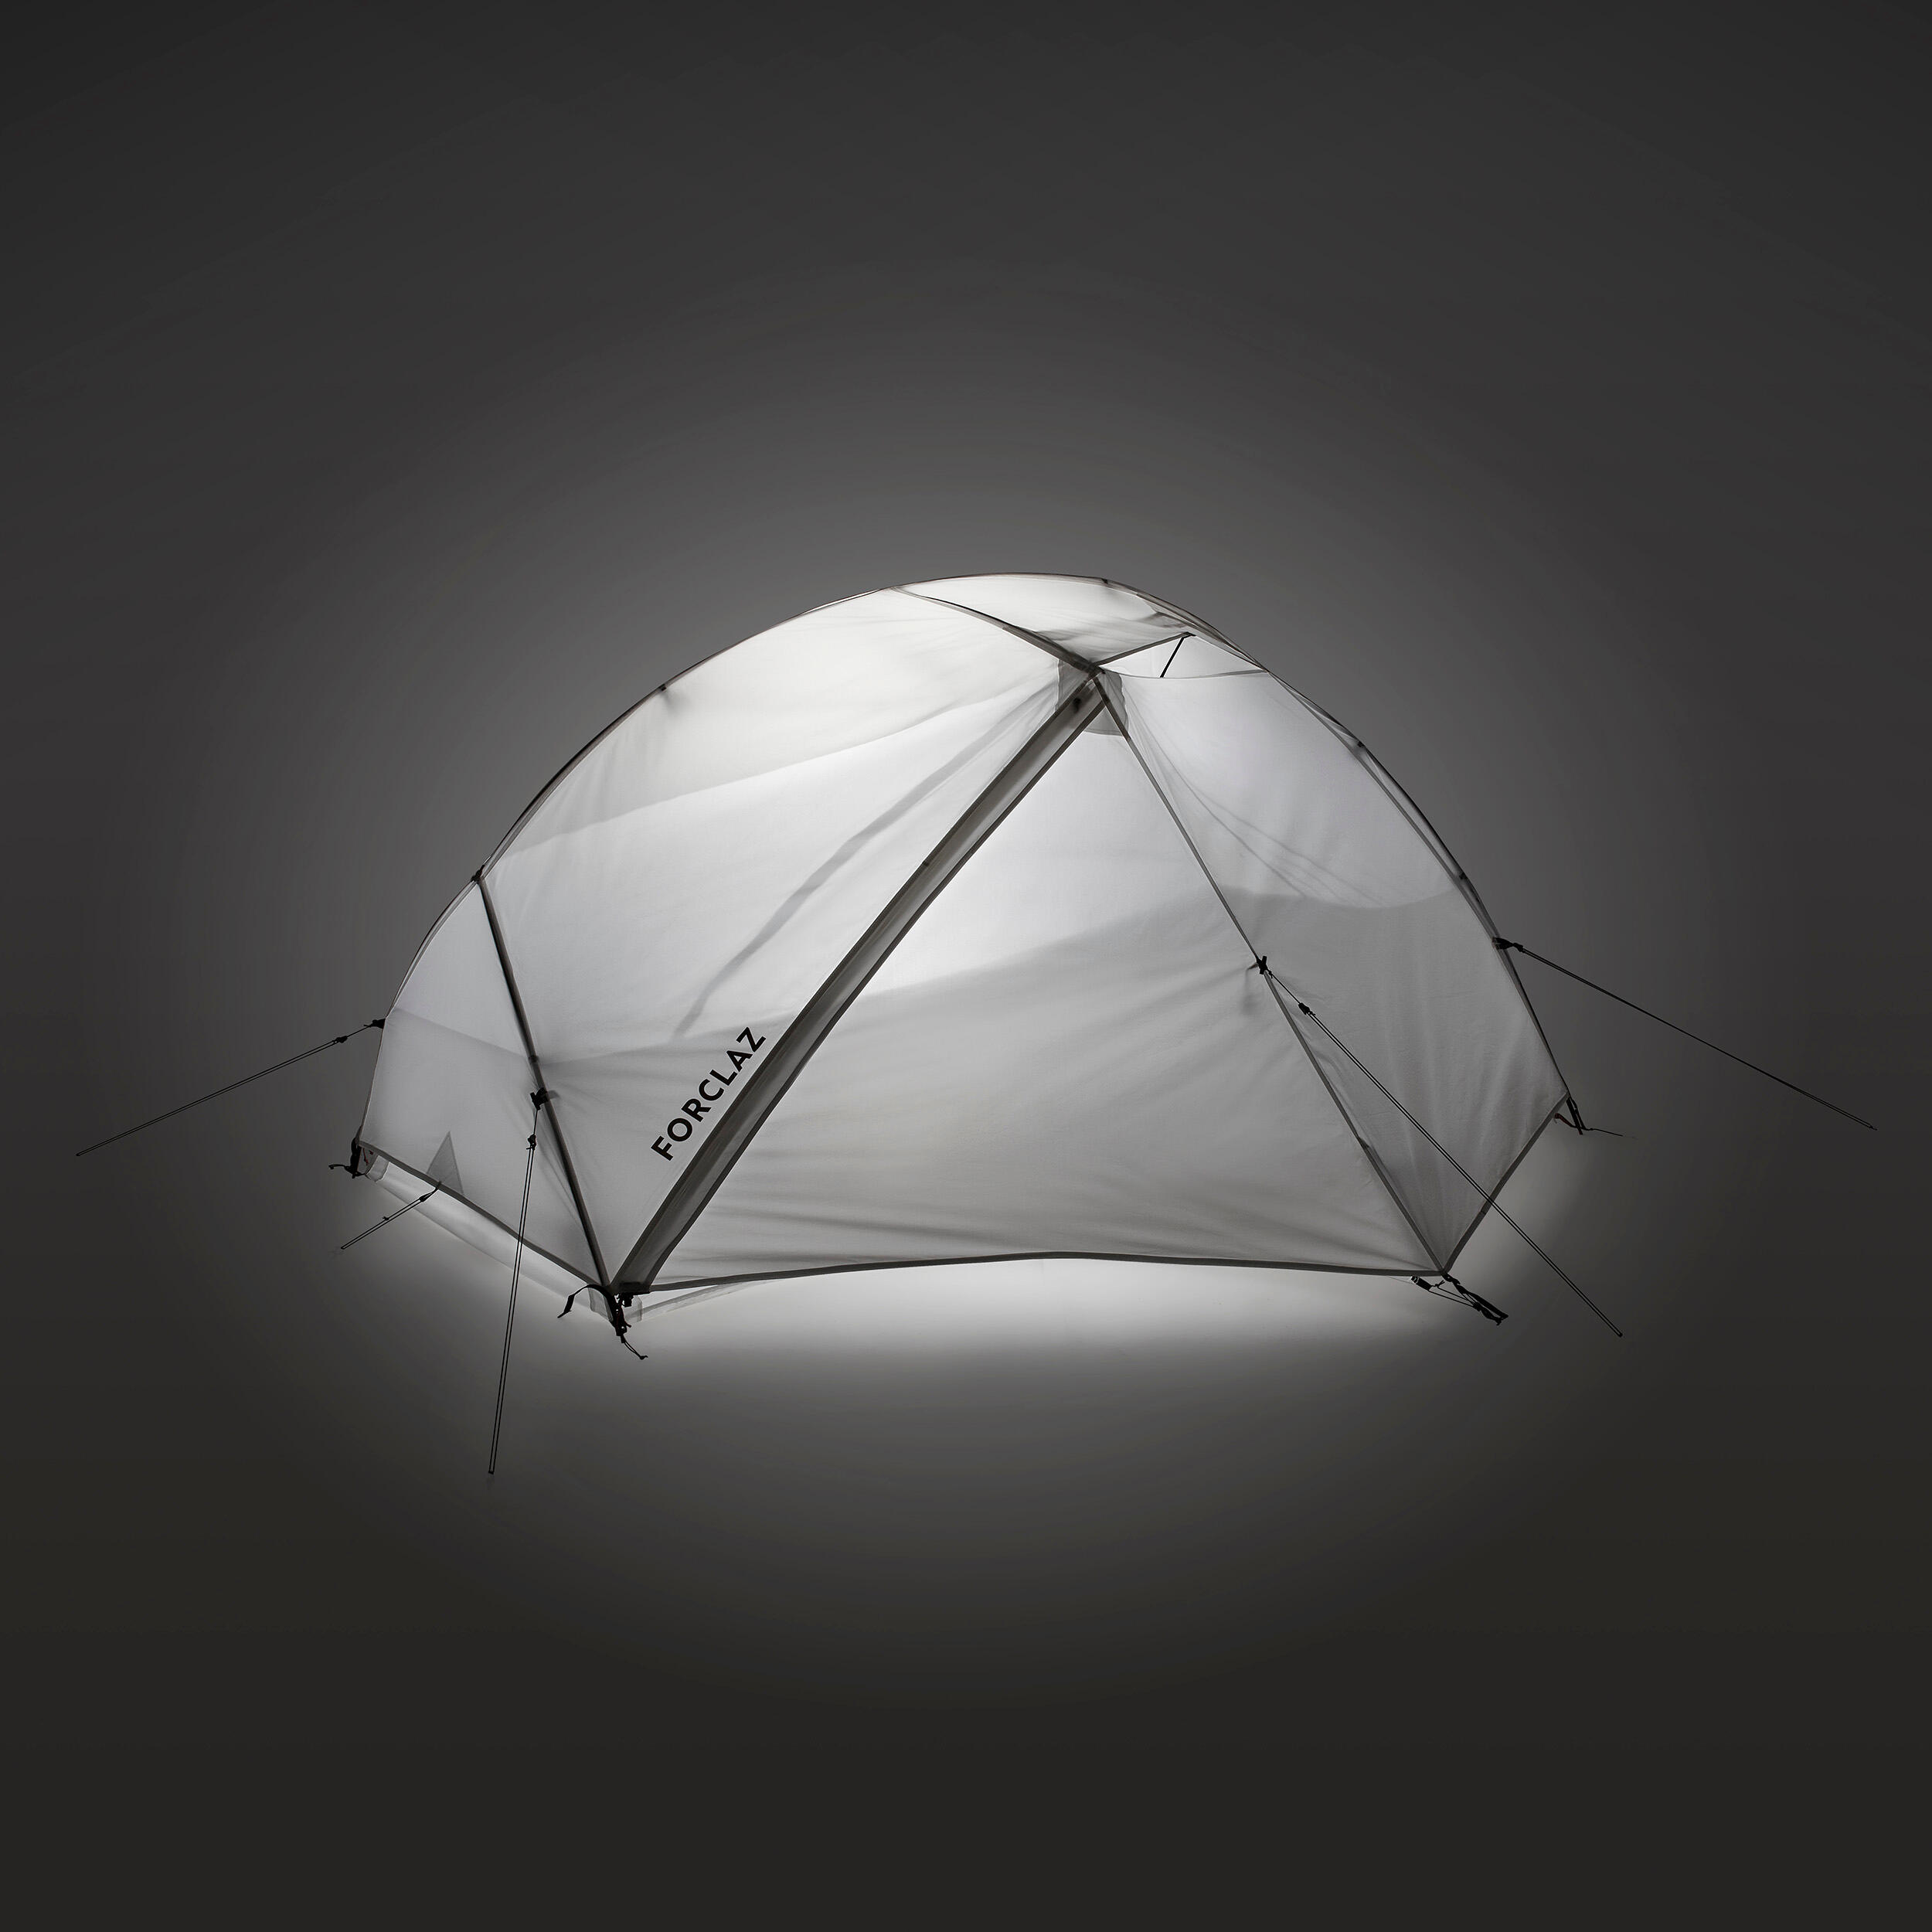 Trekking dome tent - 2-person - MT900 Minimal Editions 10/11